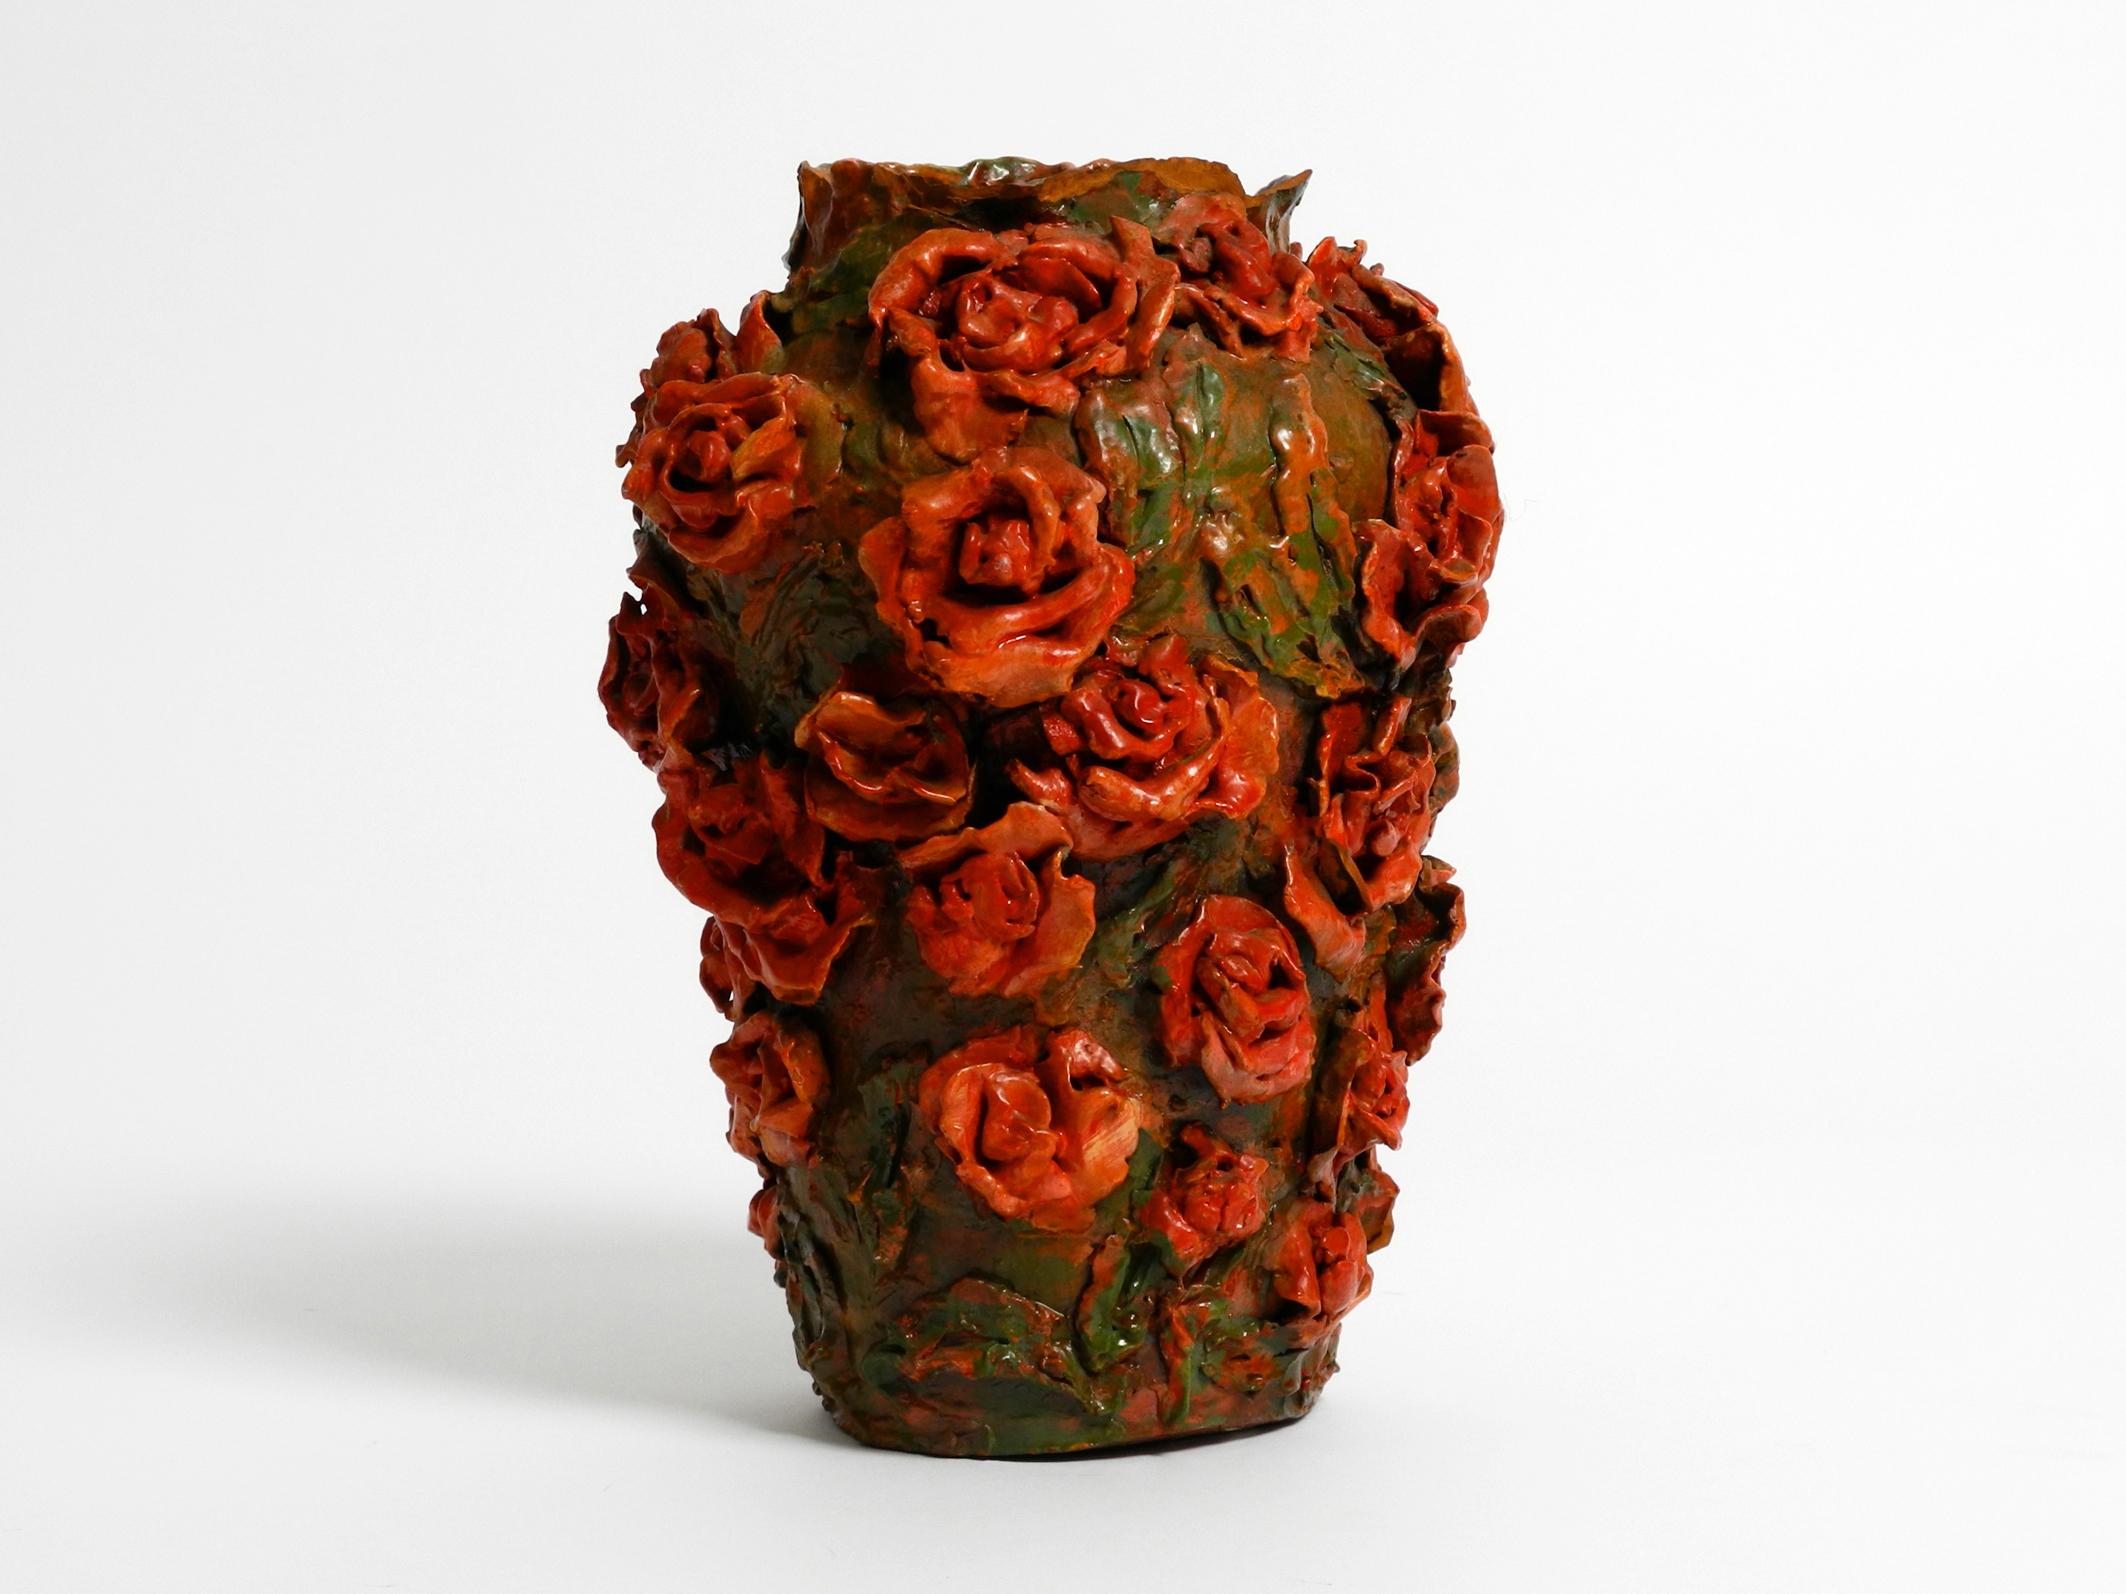 Art Nouveau Handmade Clay Vase in Green-Brown with Red Roses by Rosie Fridrin Rieger 1918 For Sale